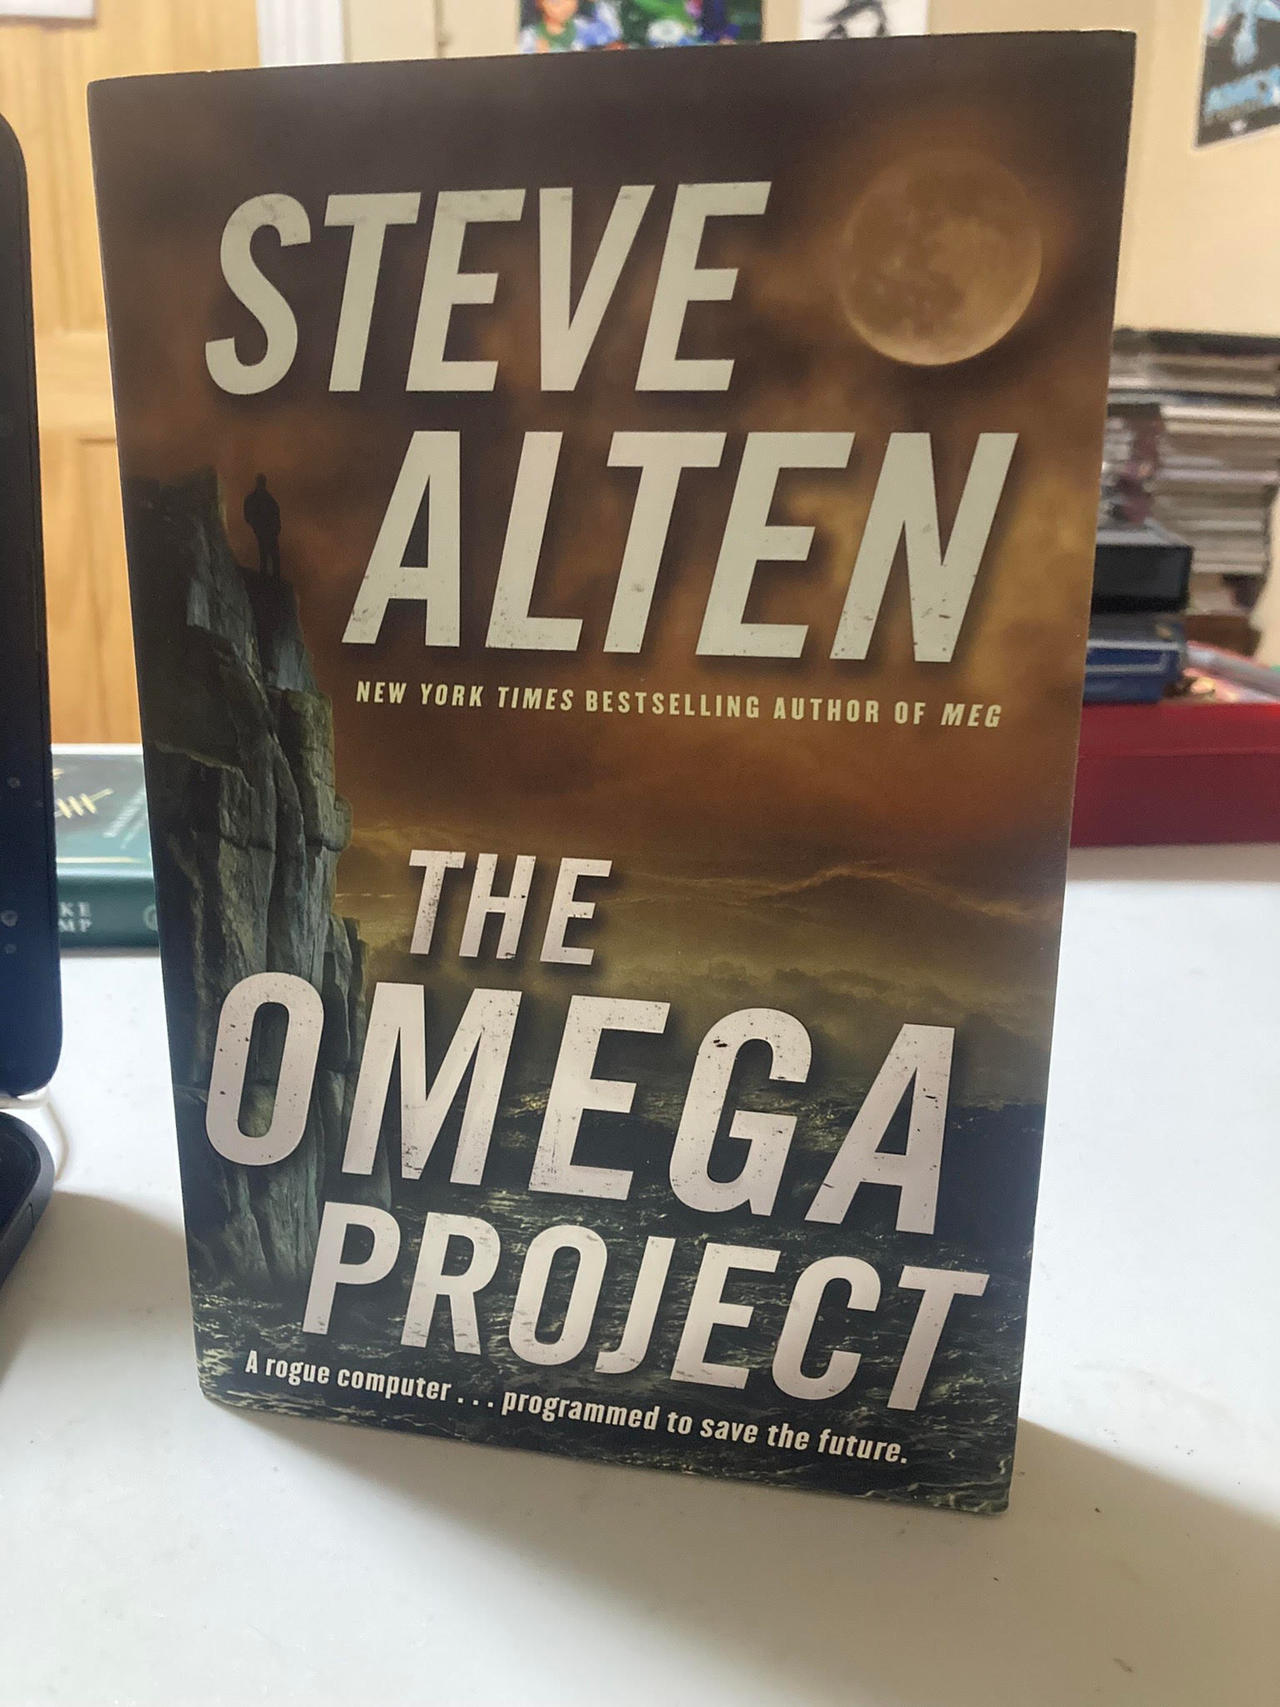 The Omega Project by kenneth-rutter on DeviantArt